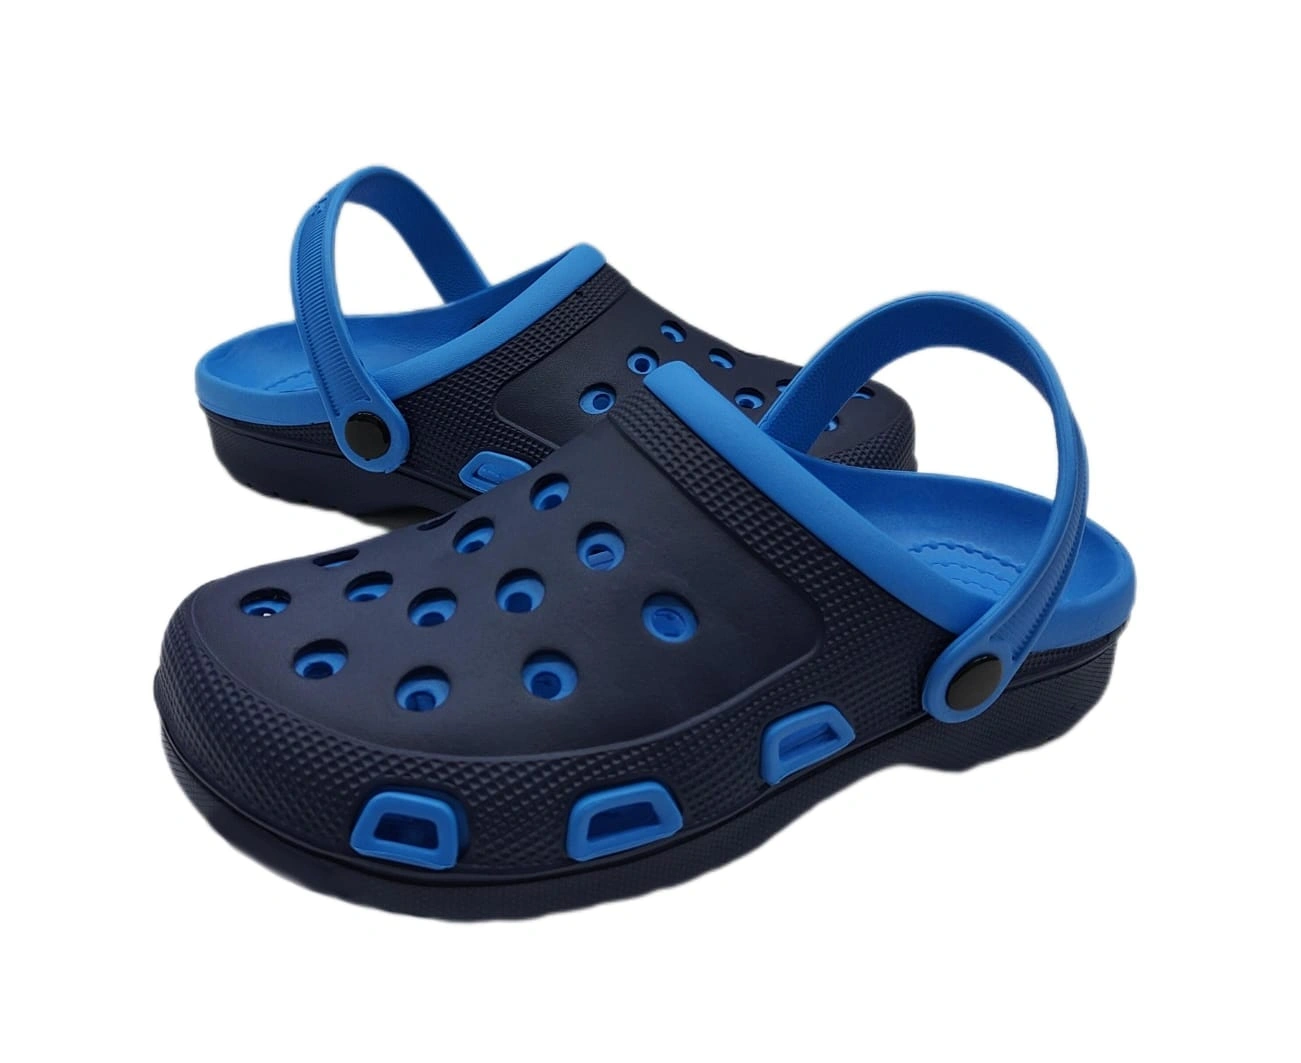 Clog Sandals for Men and Women: Comfortable, Lightweight Design with Durable Upper and Slip-Resistant Outsole for All-Day Wear-Blue-UK6-2